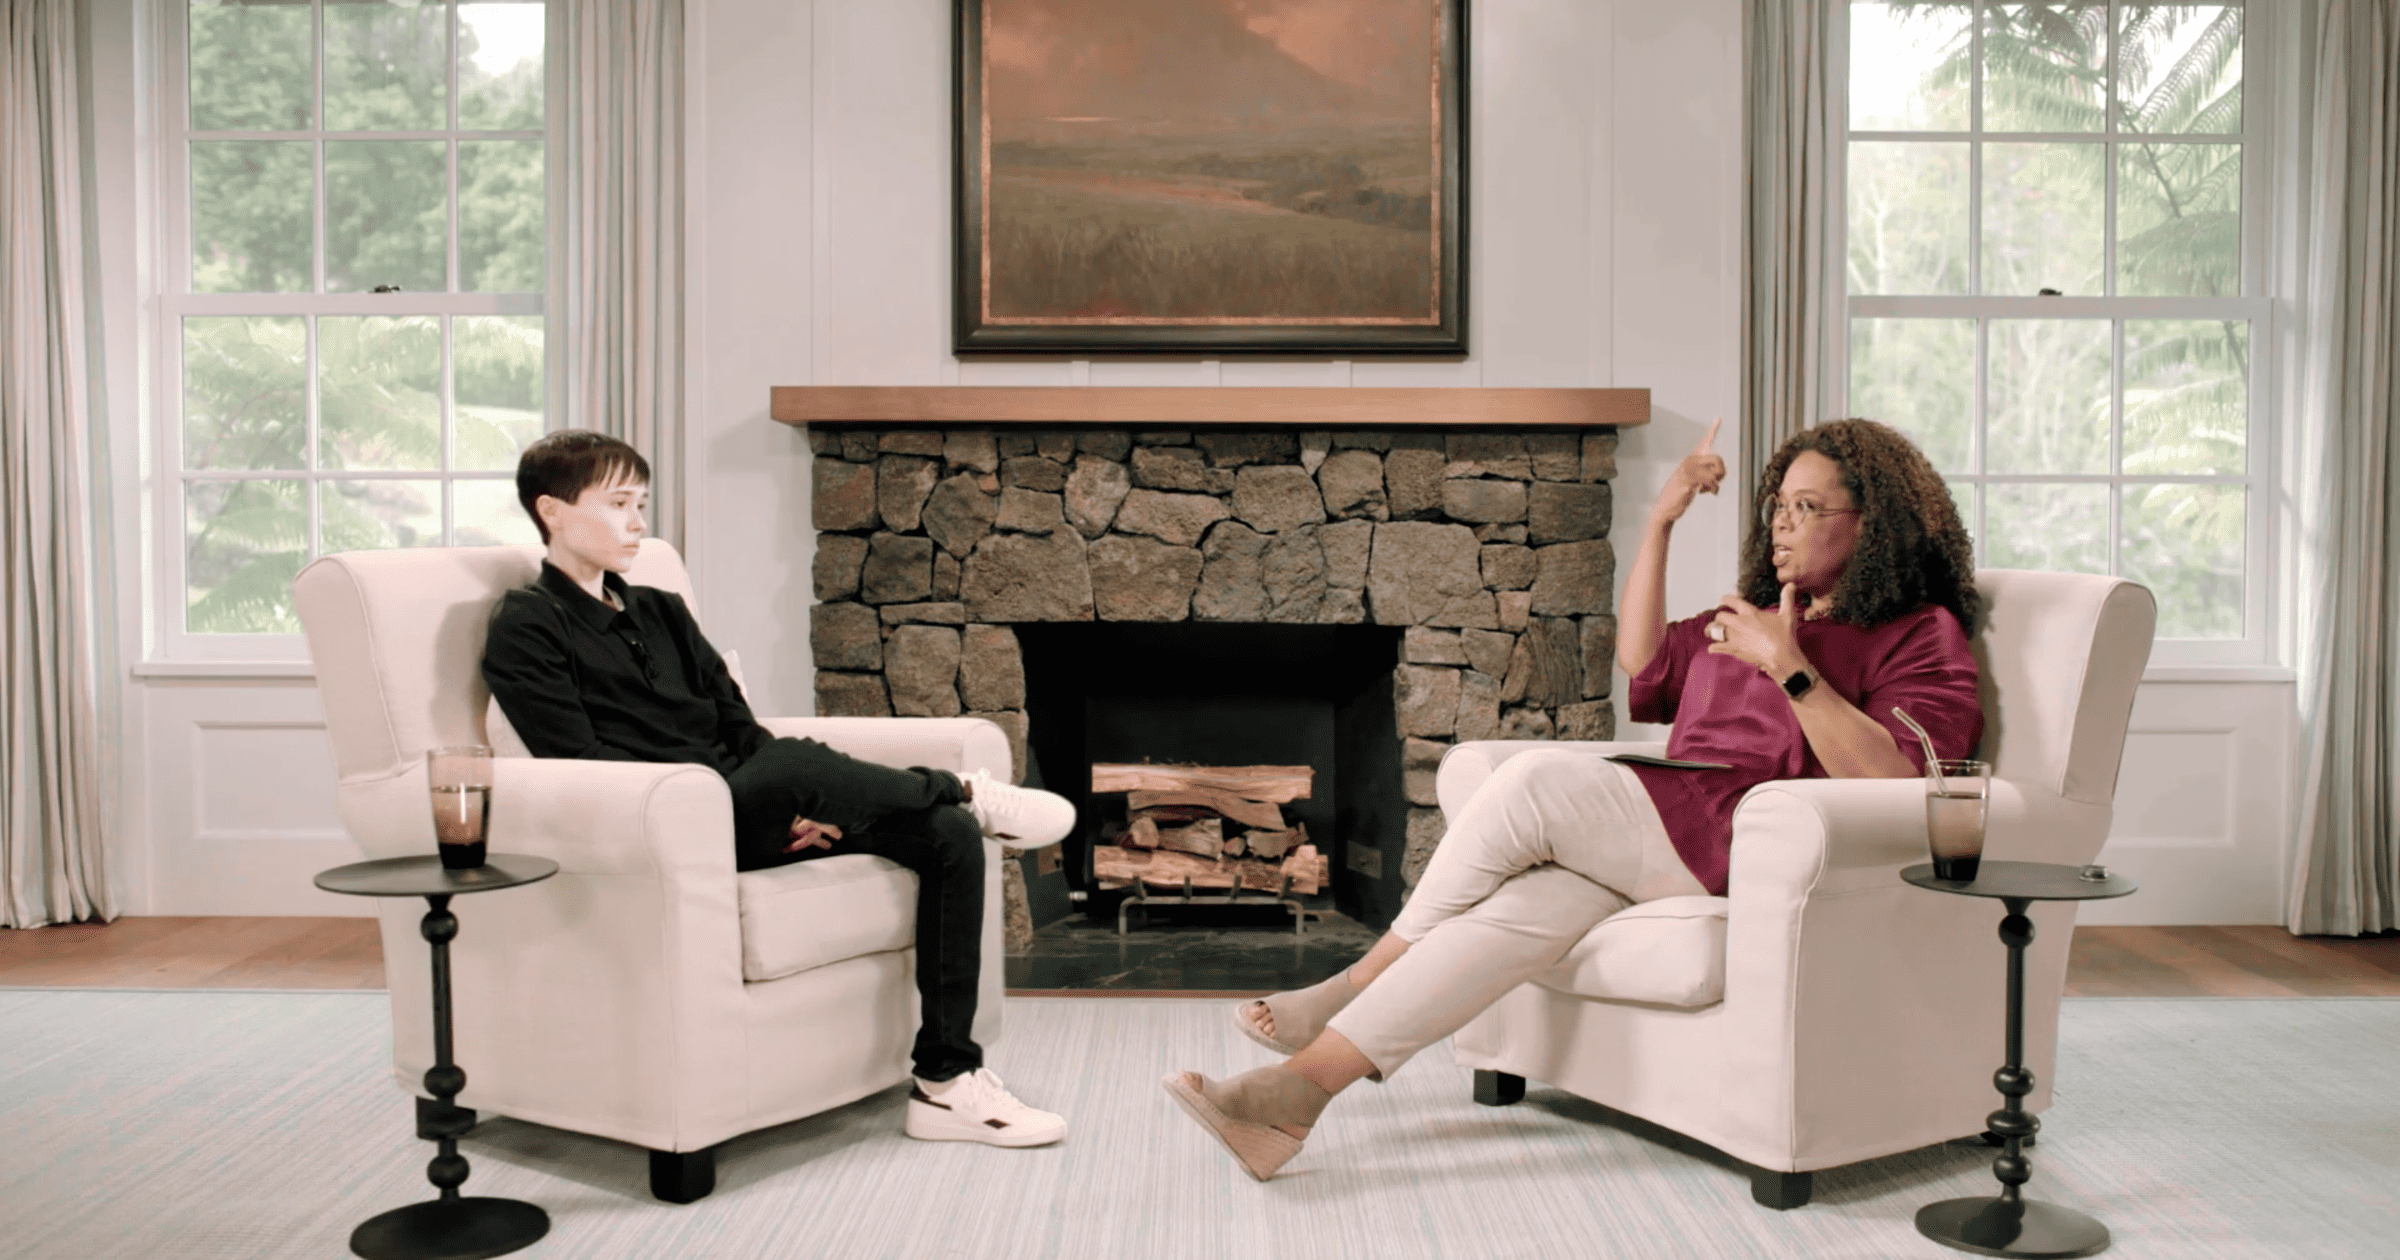 Elliot Page Interview With Oprah to Air on Apple TV+ on Friday